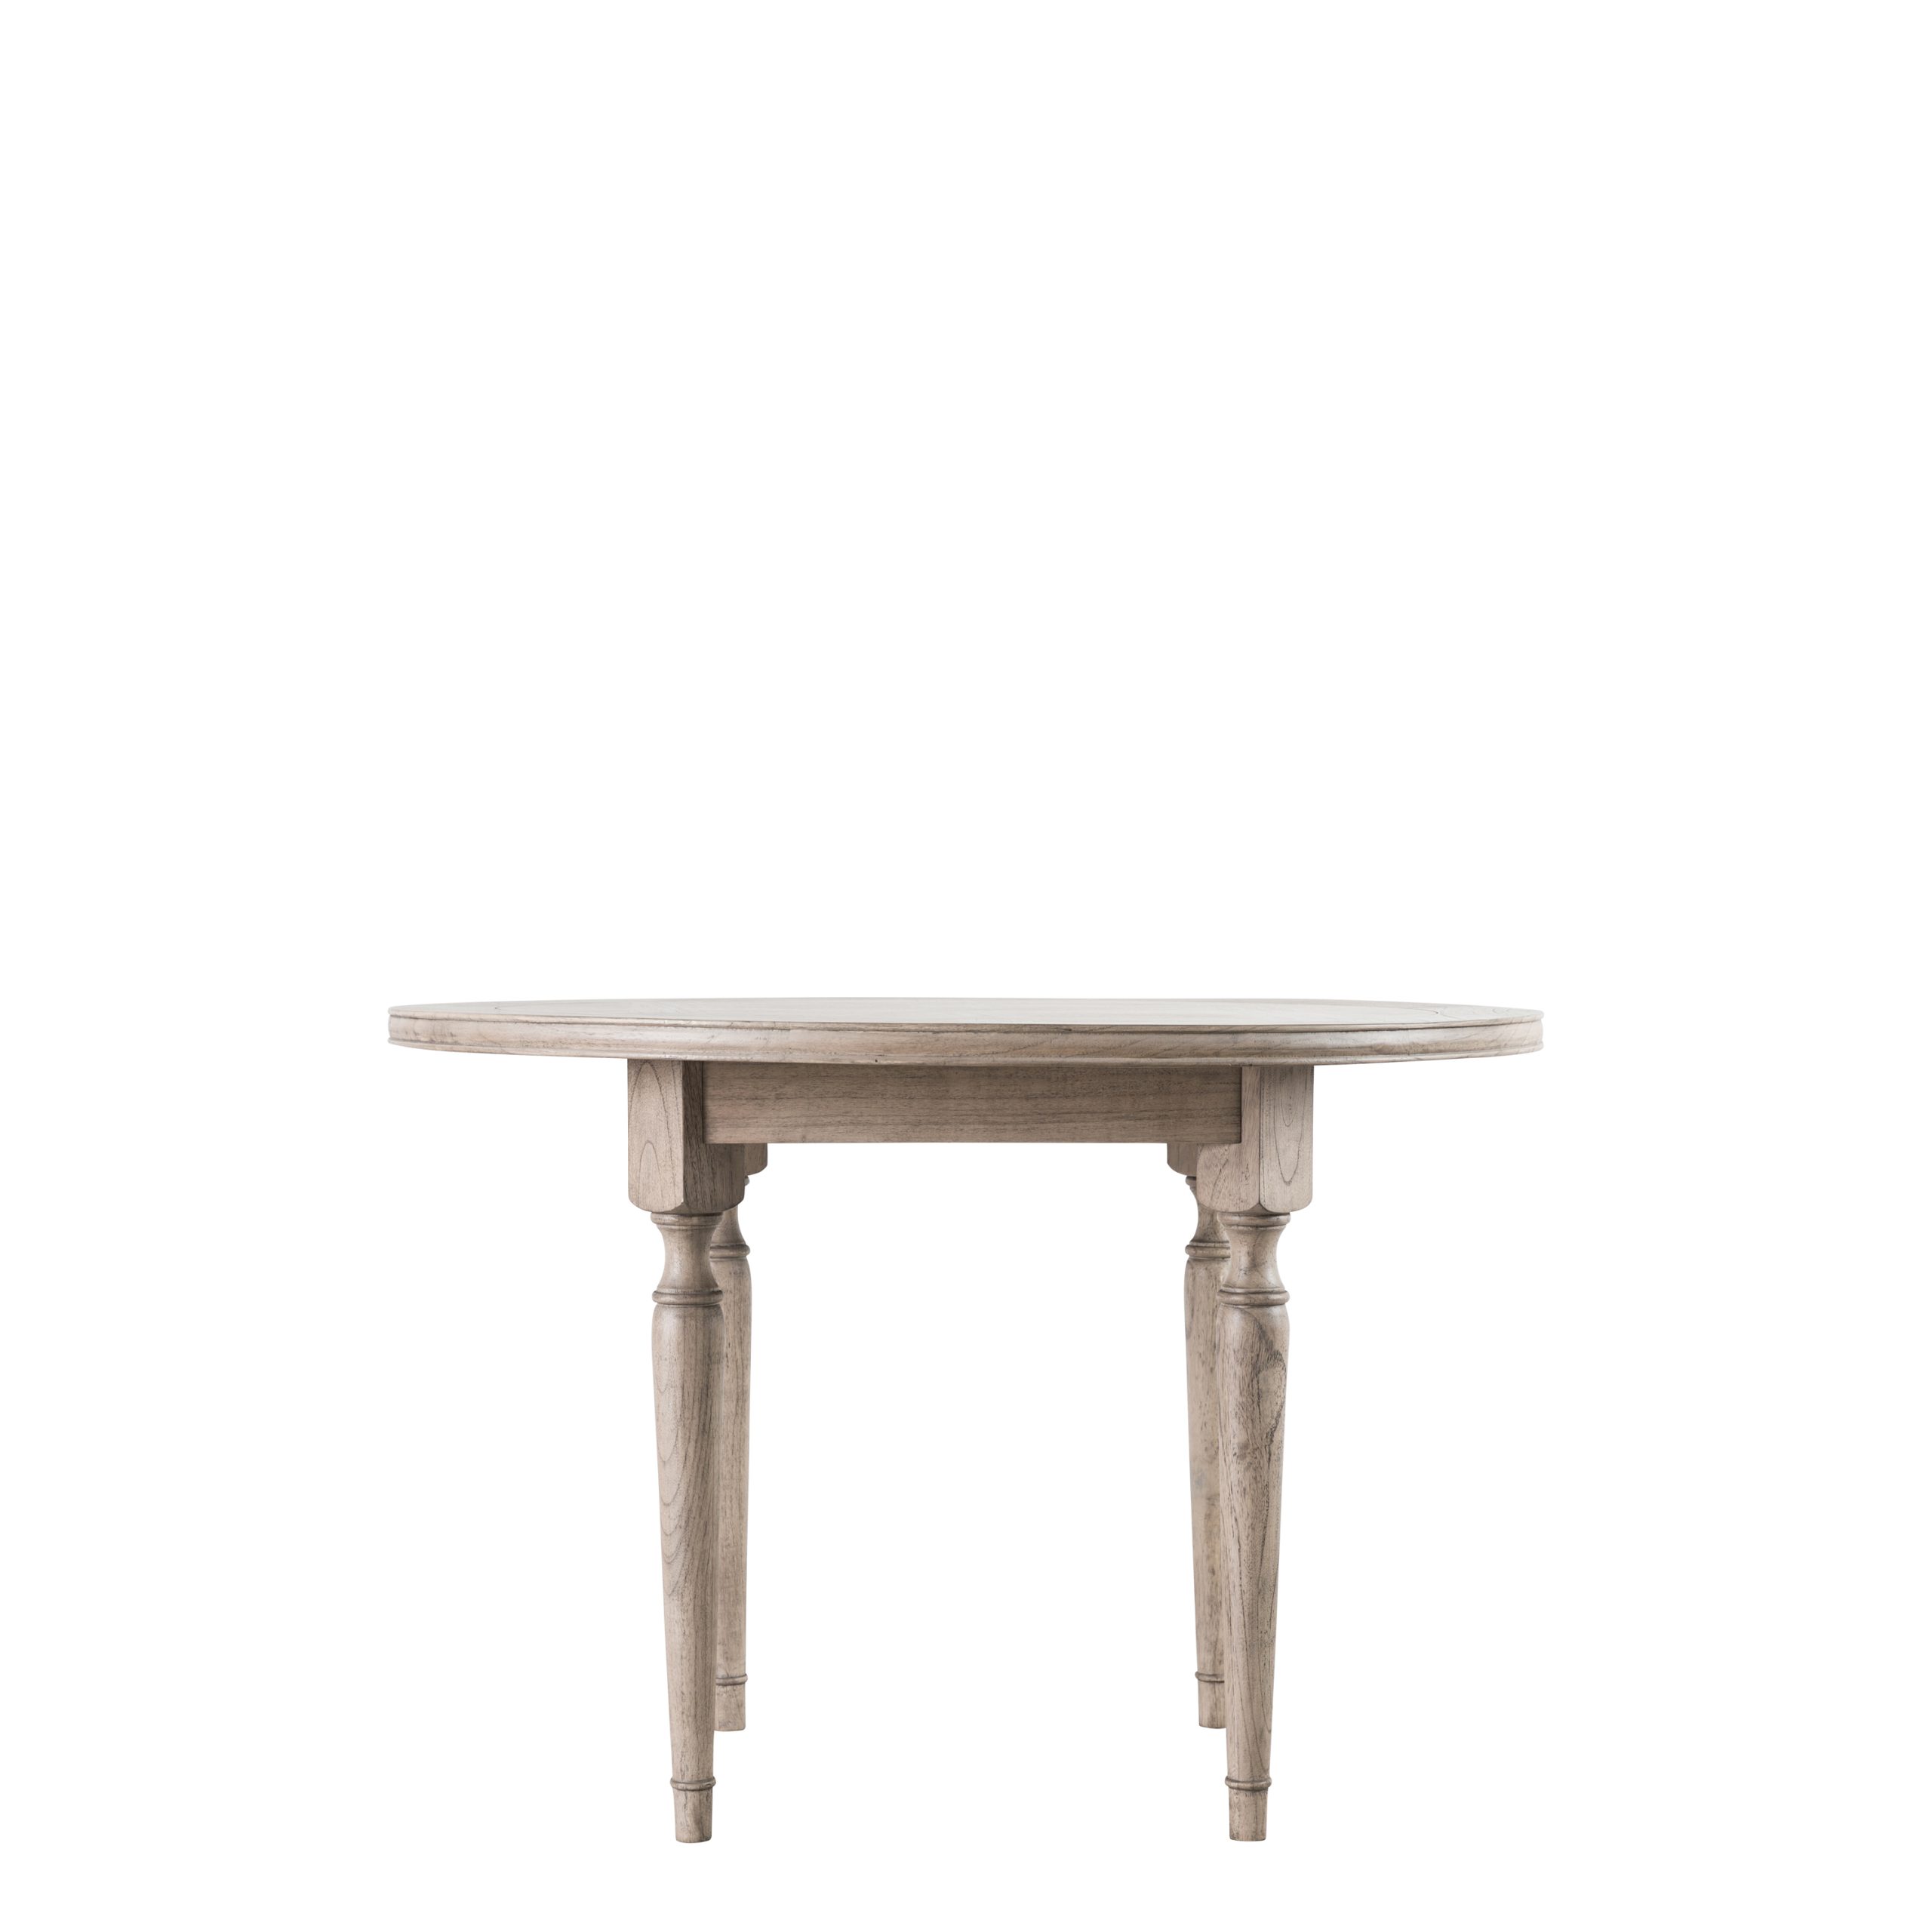 Gallery Direct Mustique Round Dining Table